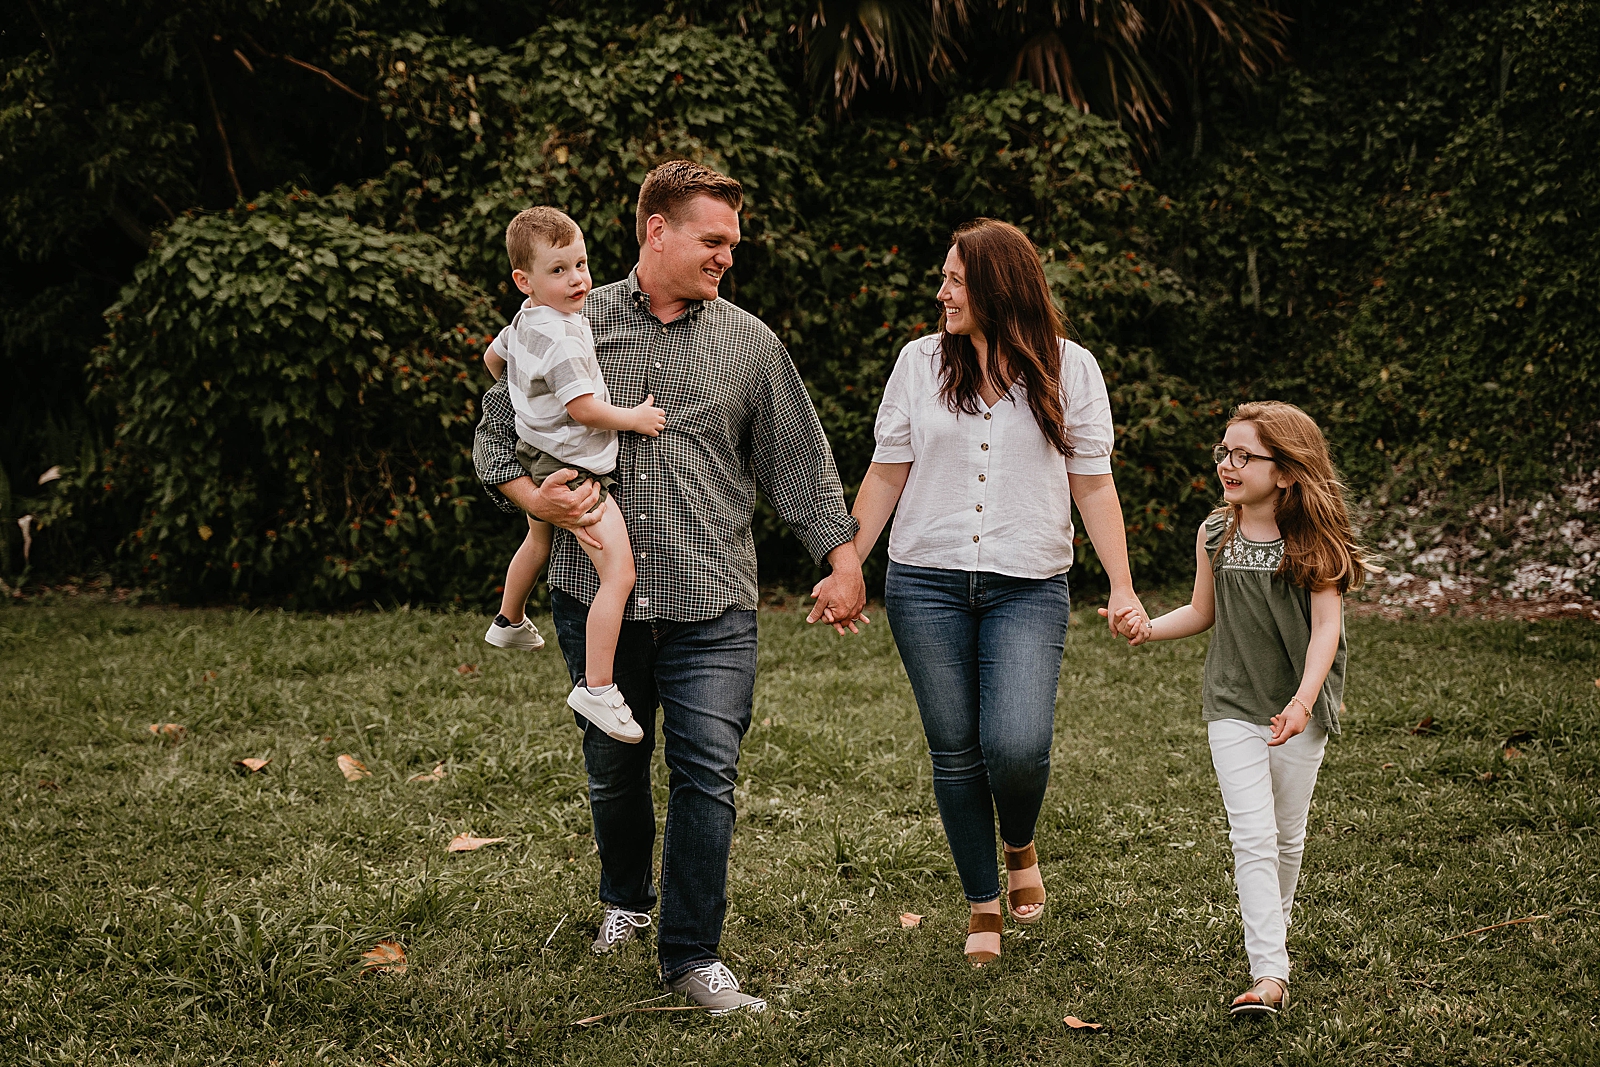 South Florida Family Photos captured by Palm Beach Family Photographer Krystal Capone Photography 